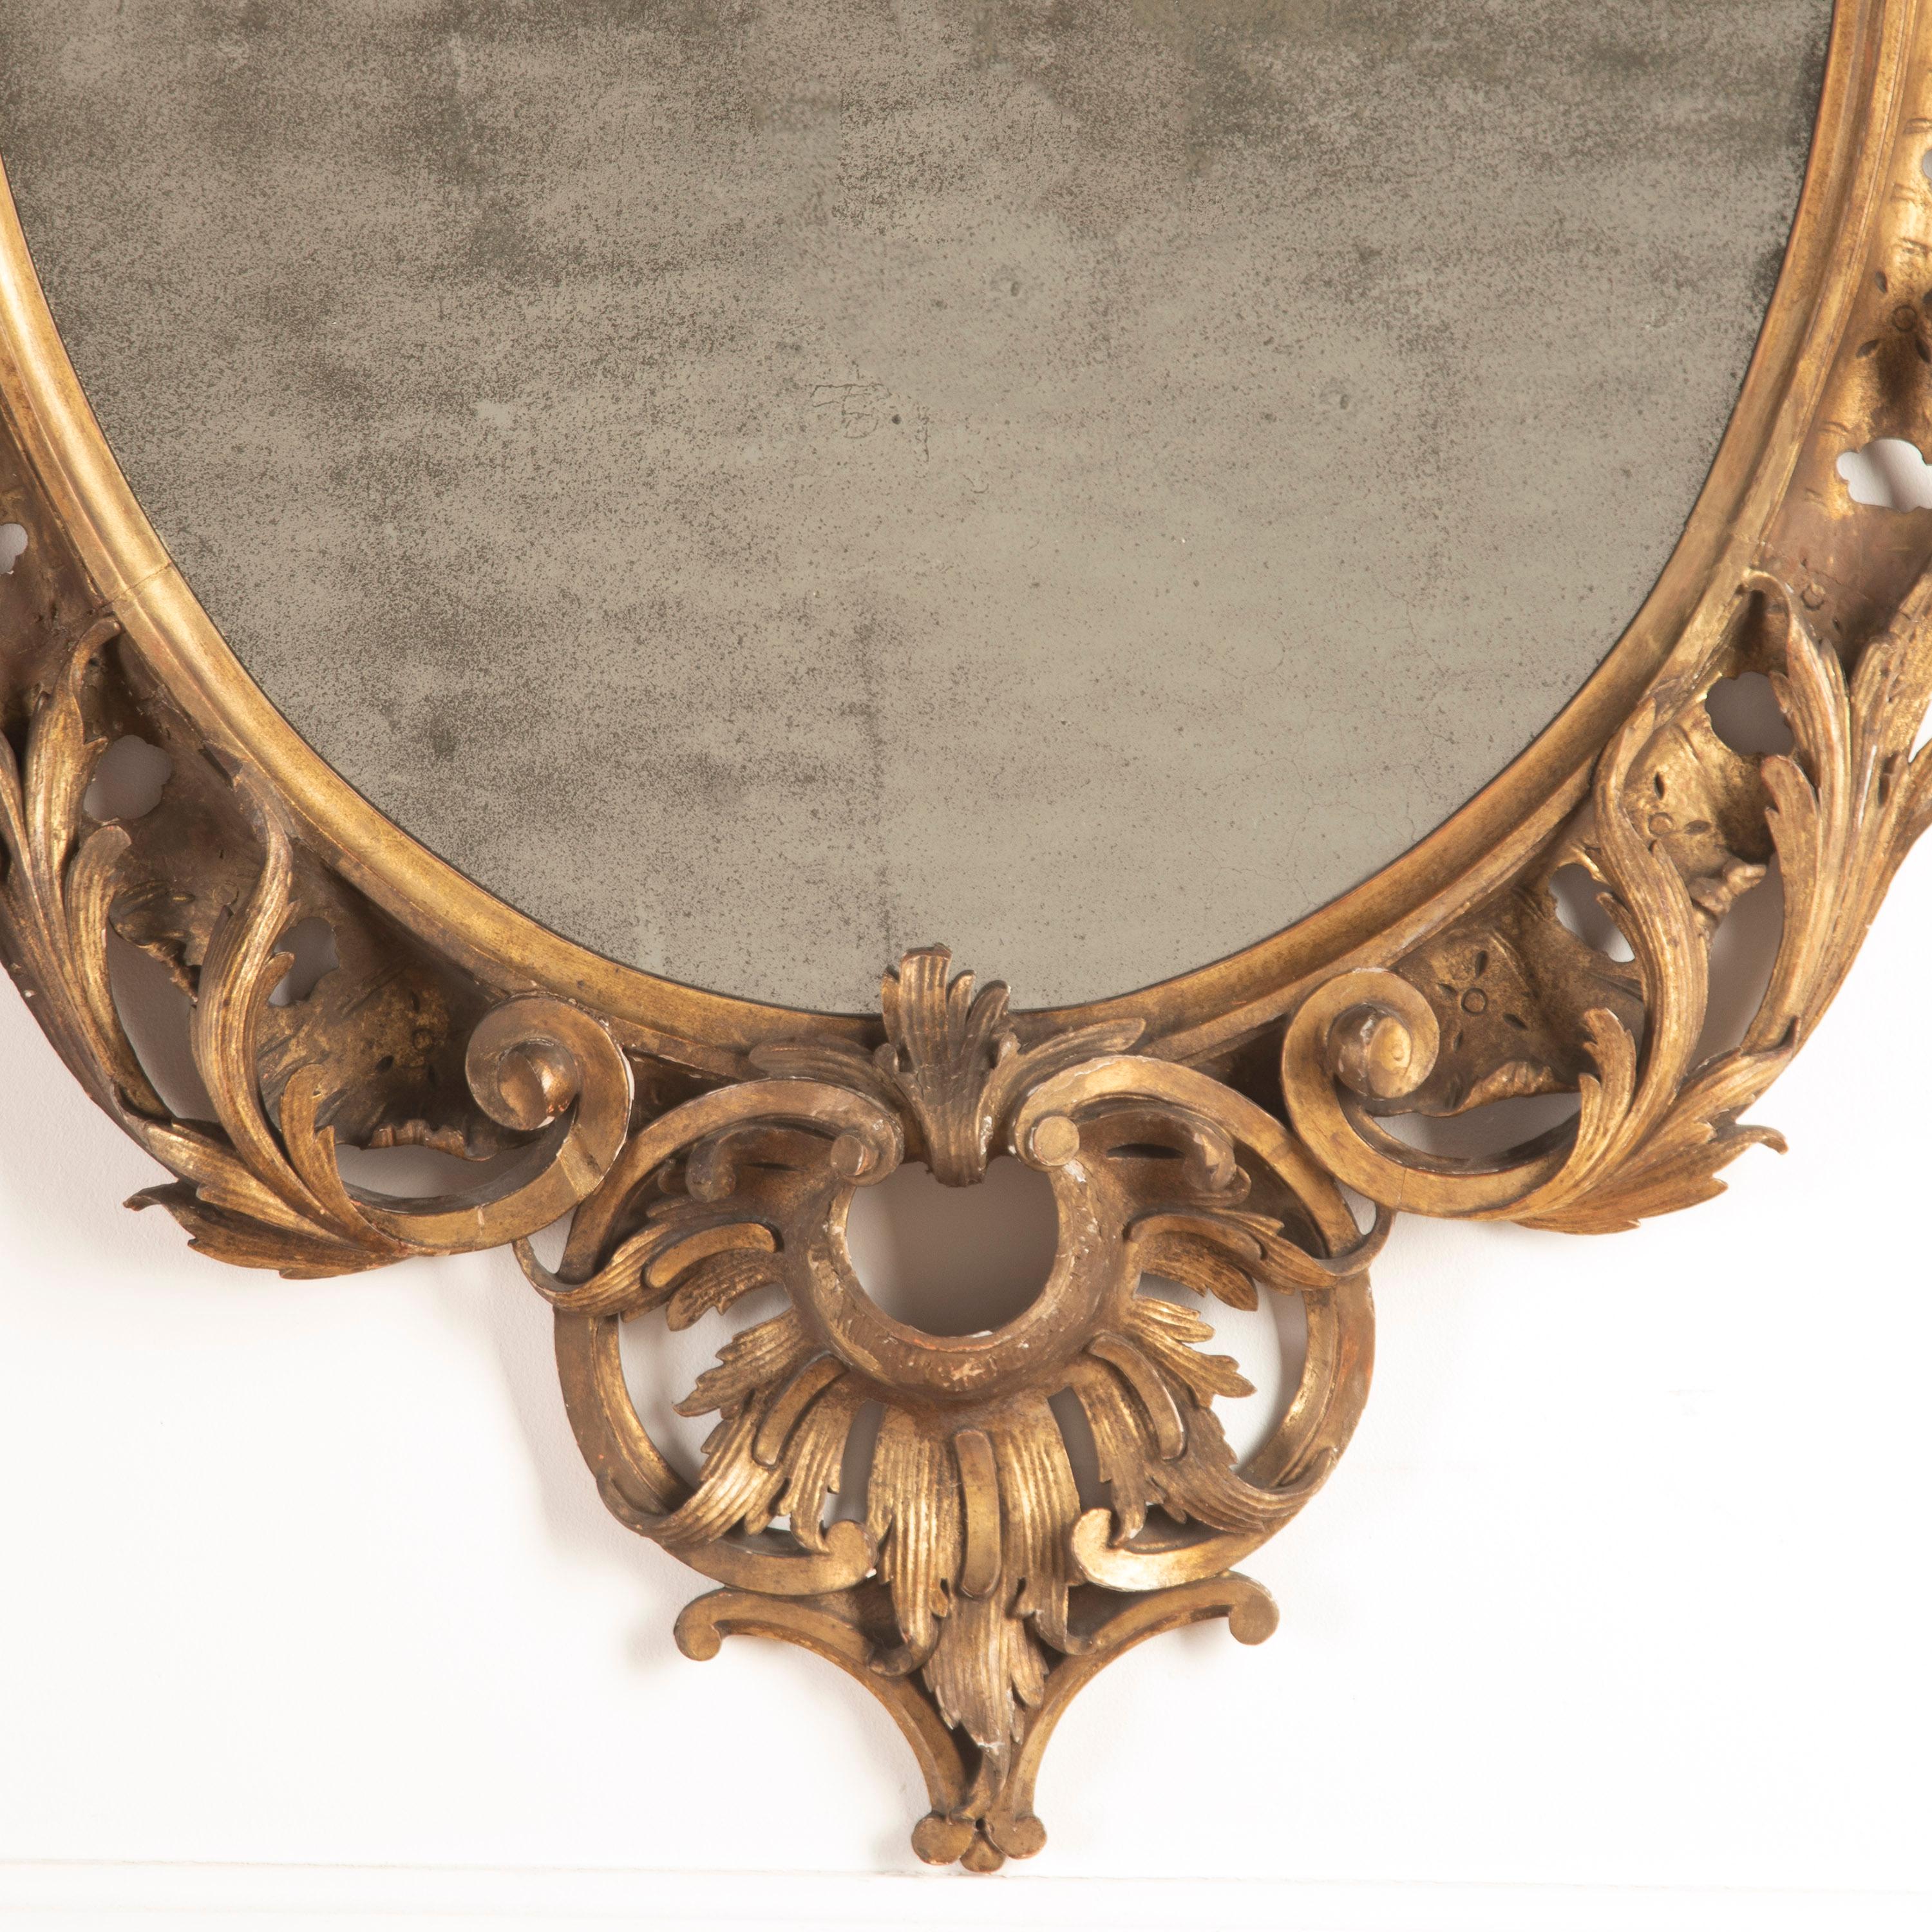 Beautifully carved and gilt limewood English mid-19th Century mirror.

This mirror was created after the earlier designs of Matthias Lock.

It has a beautiful mercury mirror plate and exceptional carvings throughout. This flamboyant mirror is